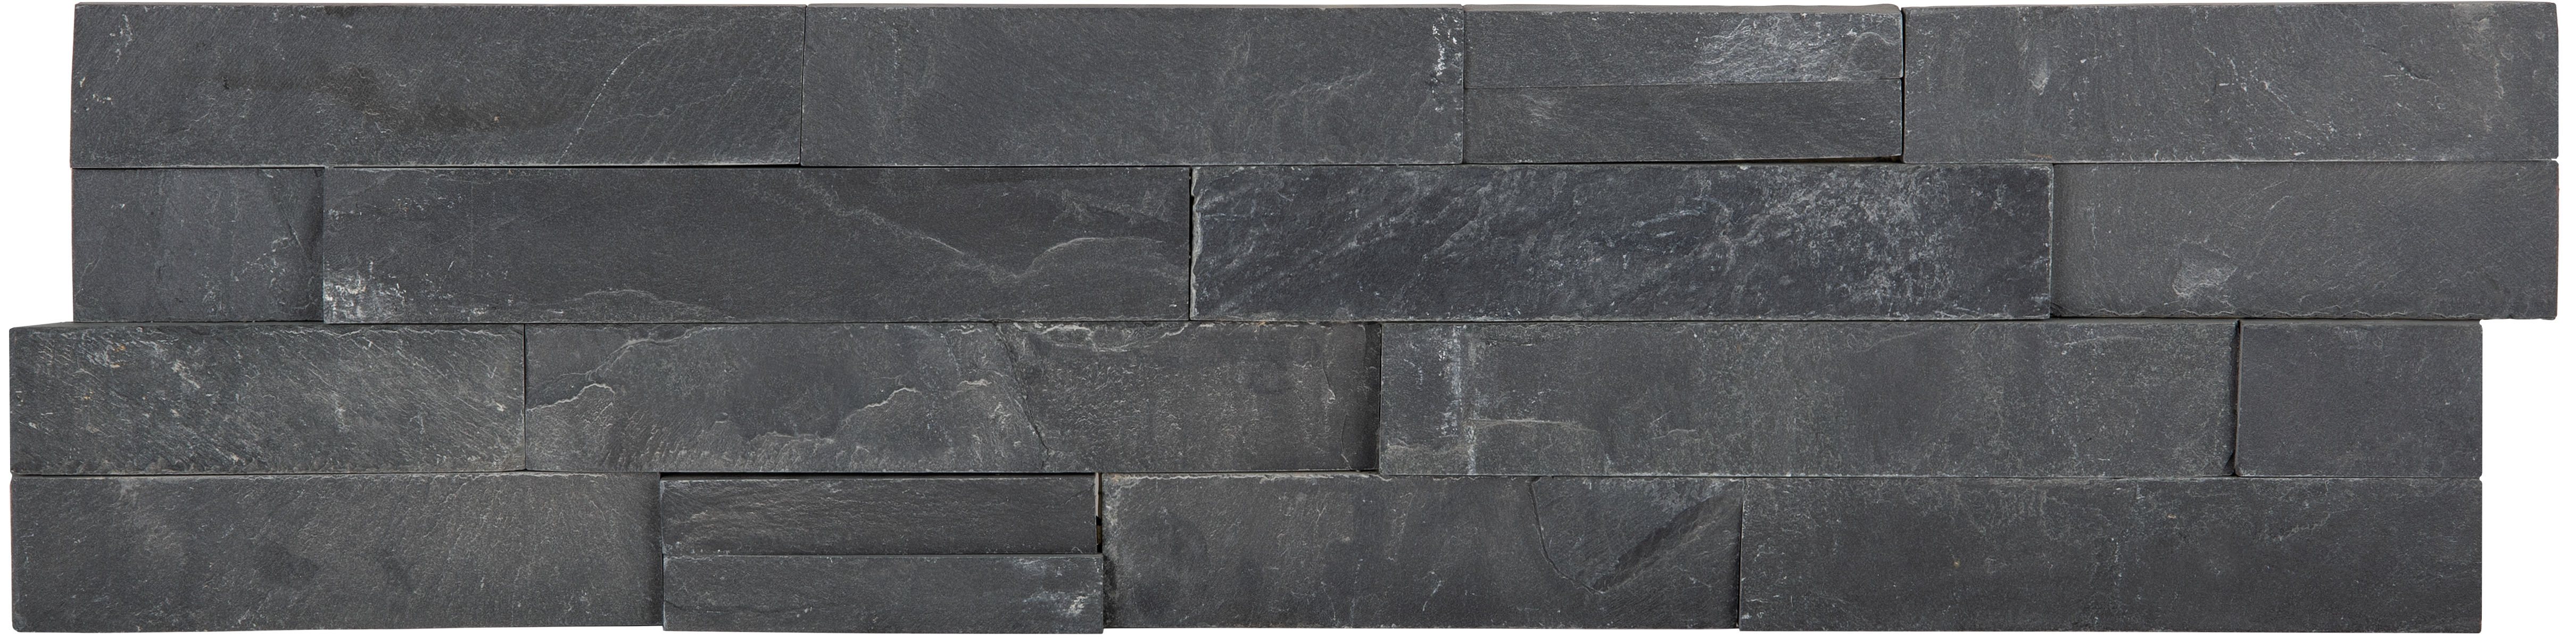 slate carbon pattern natural stone corner shelf molding from ledger stone anatolia collection distributed by surface group international split face finish straight edge edge 6x24 bar shape